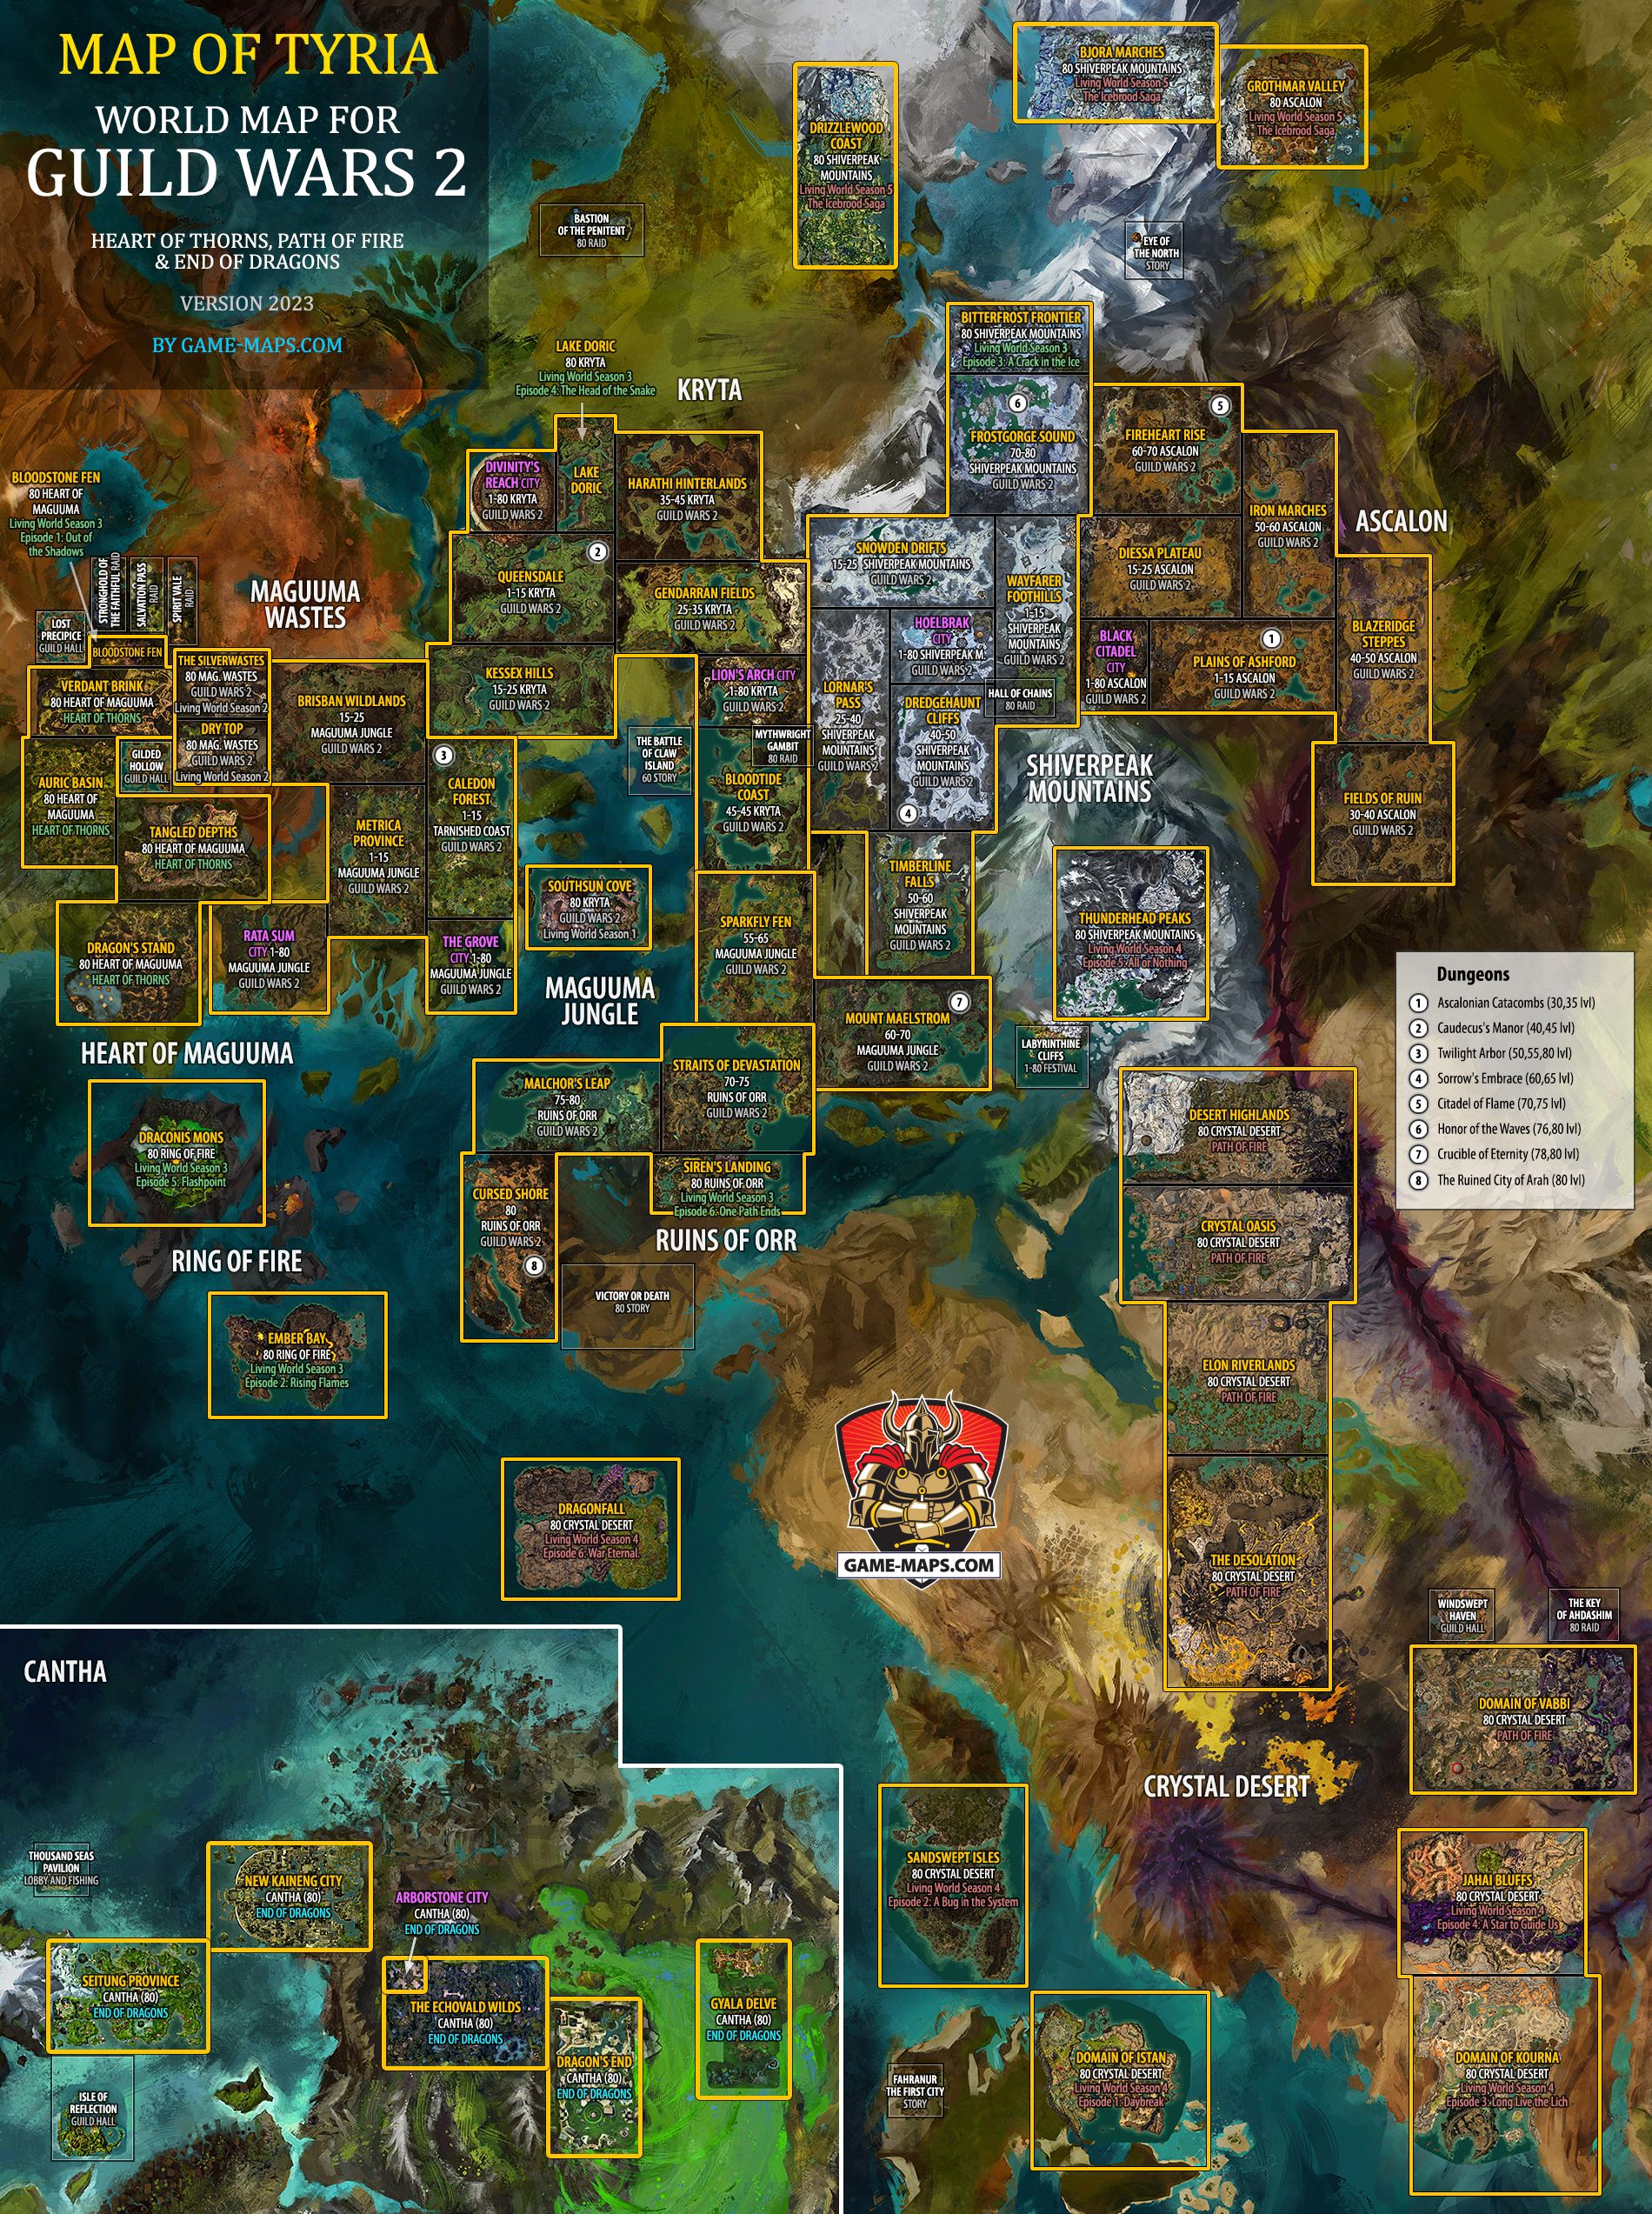 2 Maps Map of Tyria Continent, 1-80 lvl, Guild Wars 2.